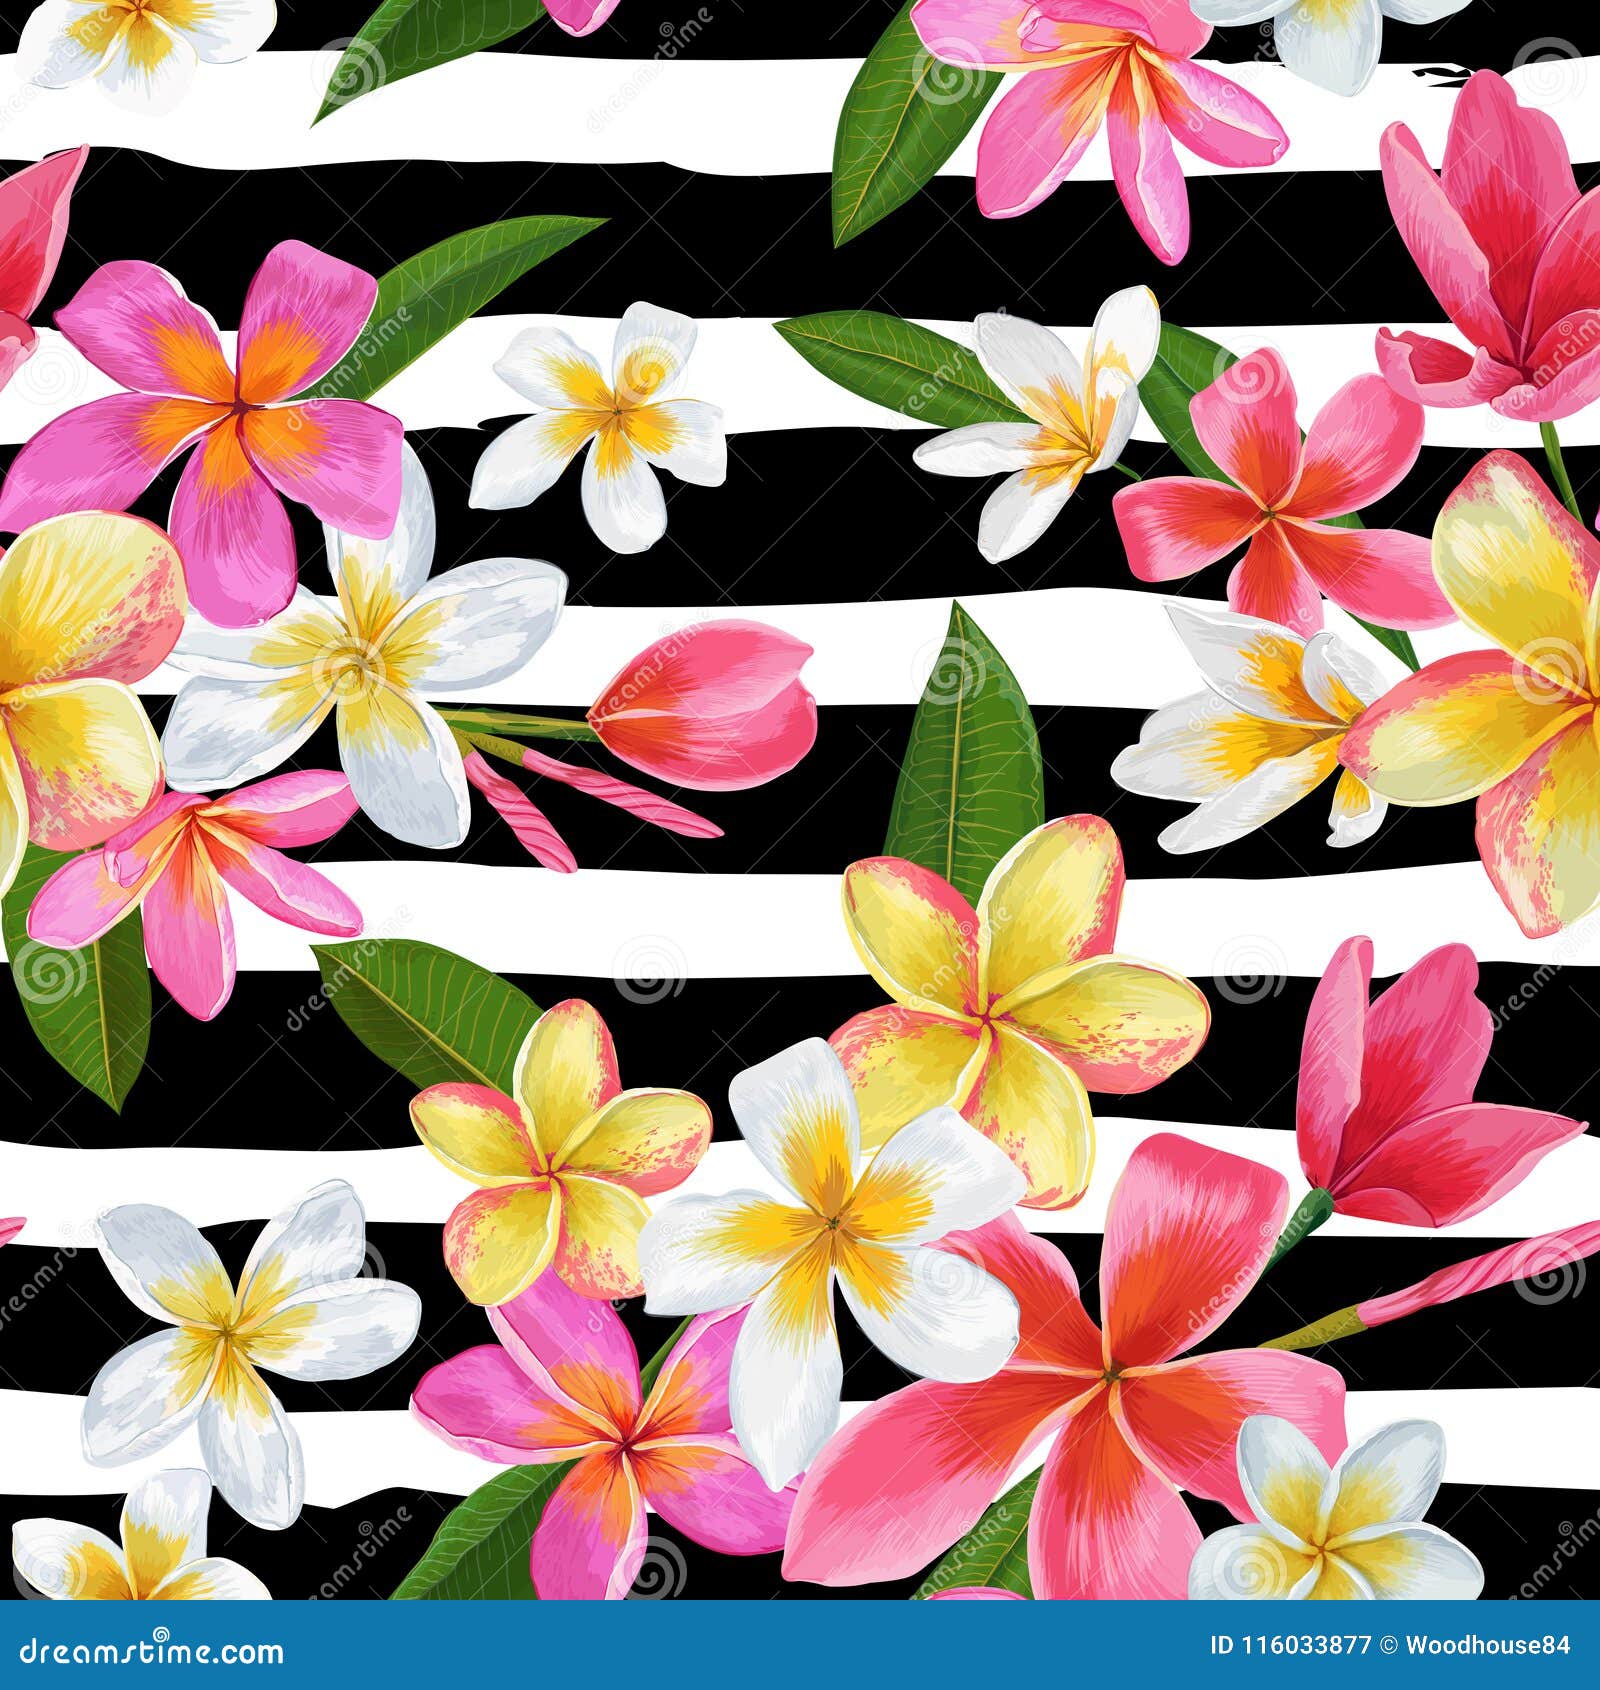 watercolor tropical flowers and palm leaves seamless pattern. floral hand drawn background. blooming plumeria flowers